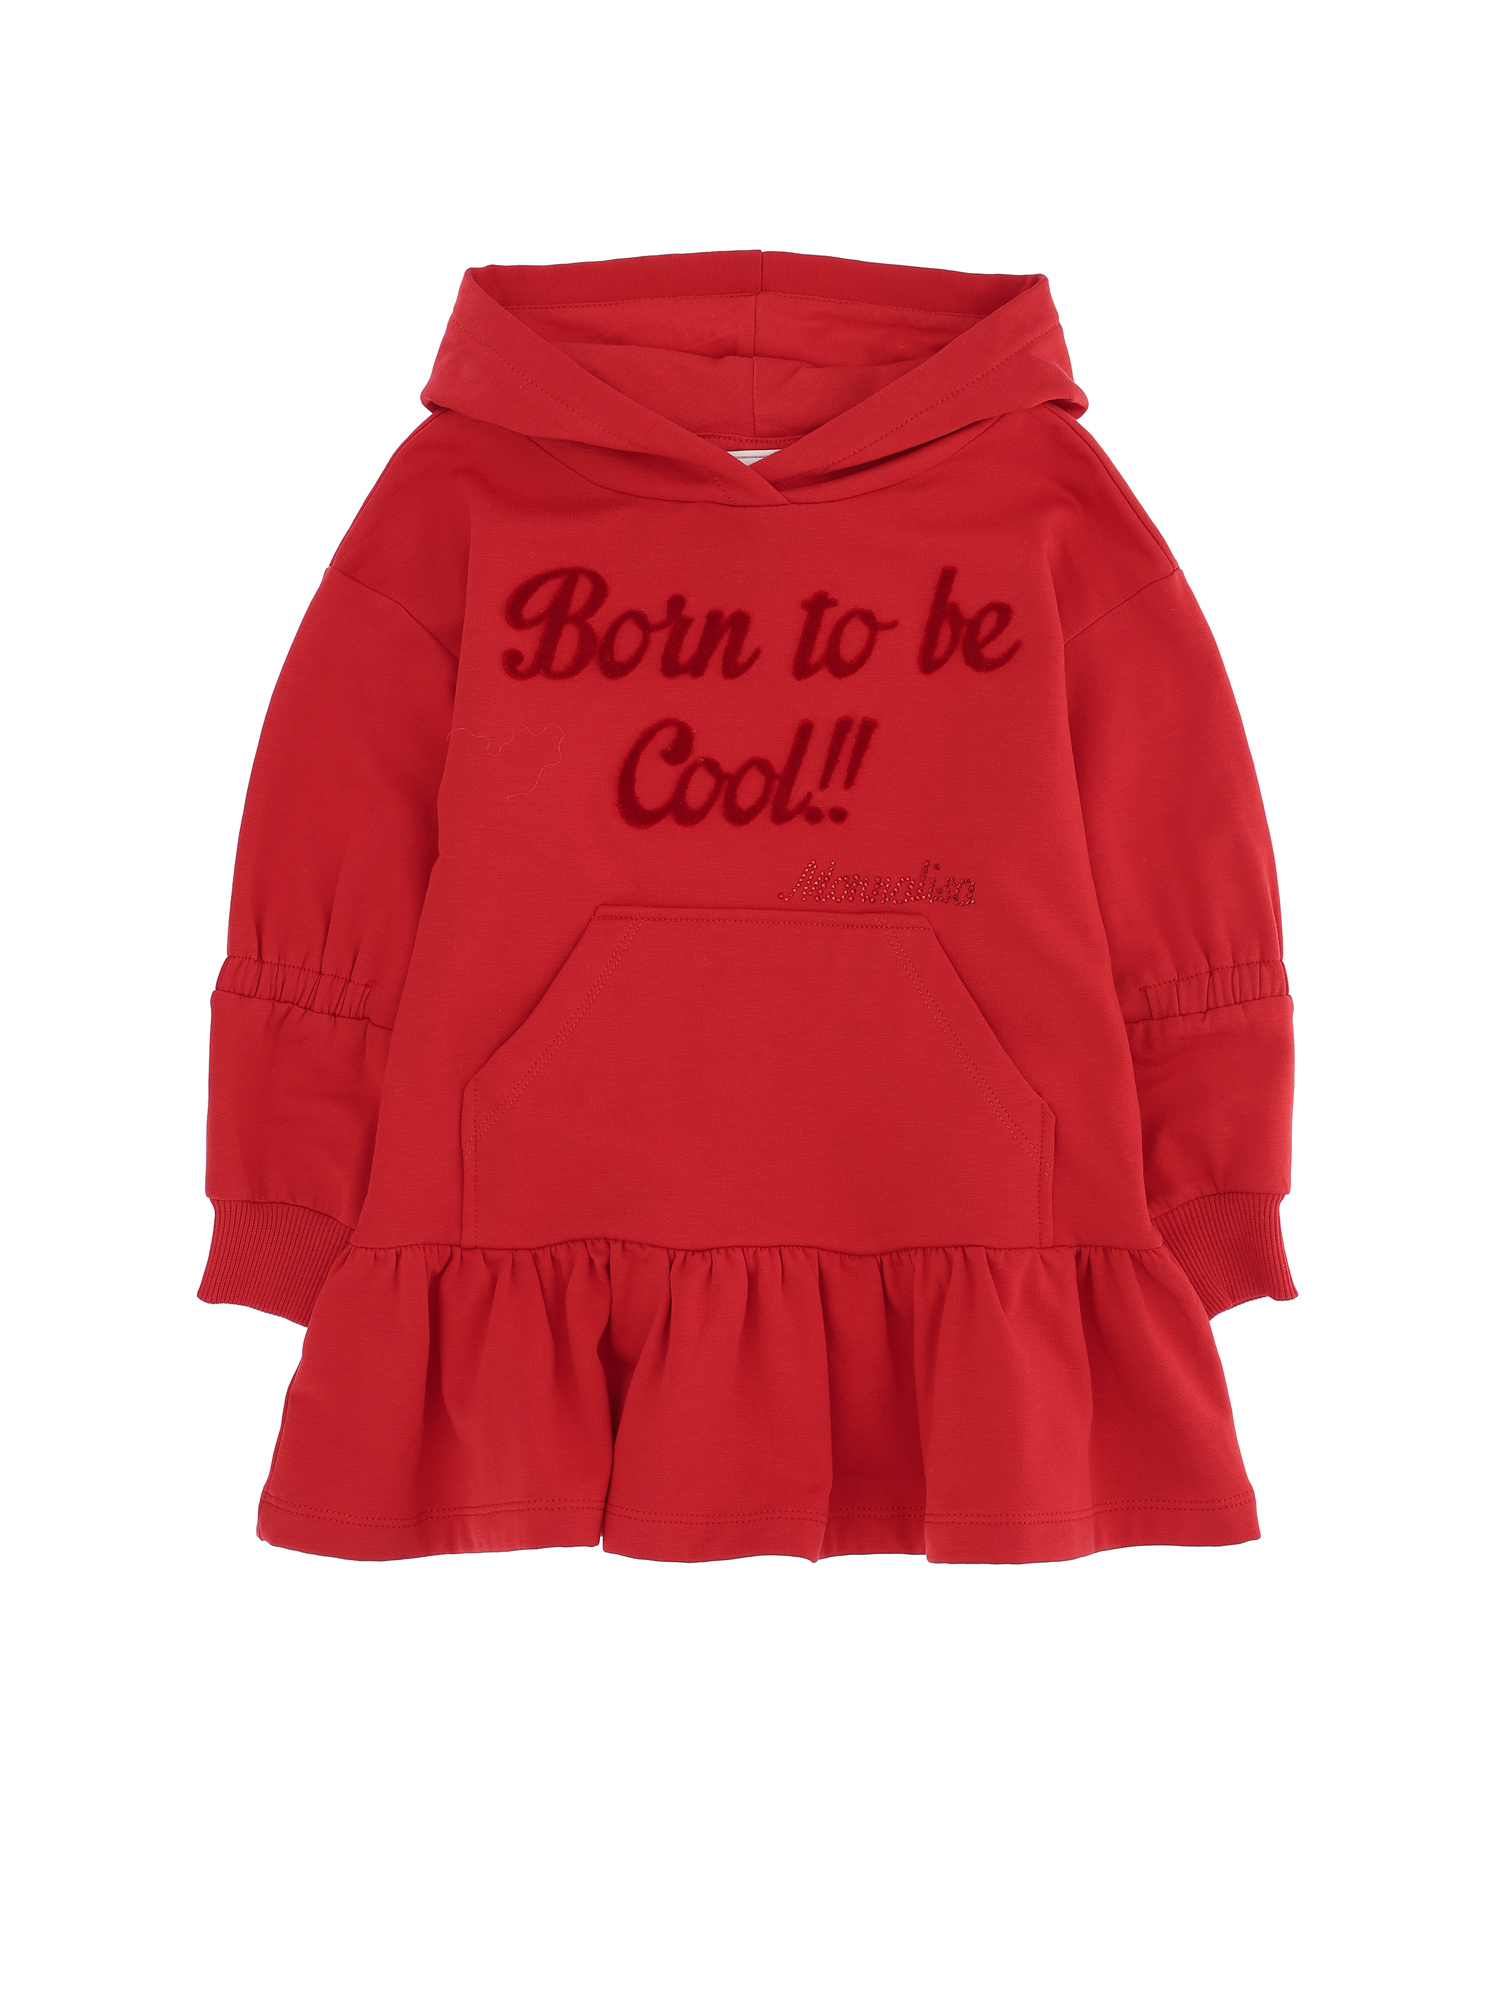 Monnalisa "born To Be Cool" Hooded Sweatshirt Dress In Ruby Red